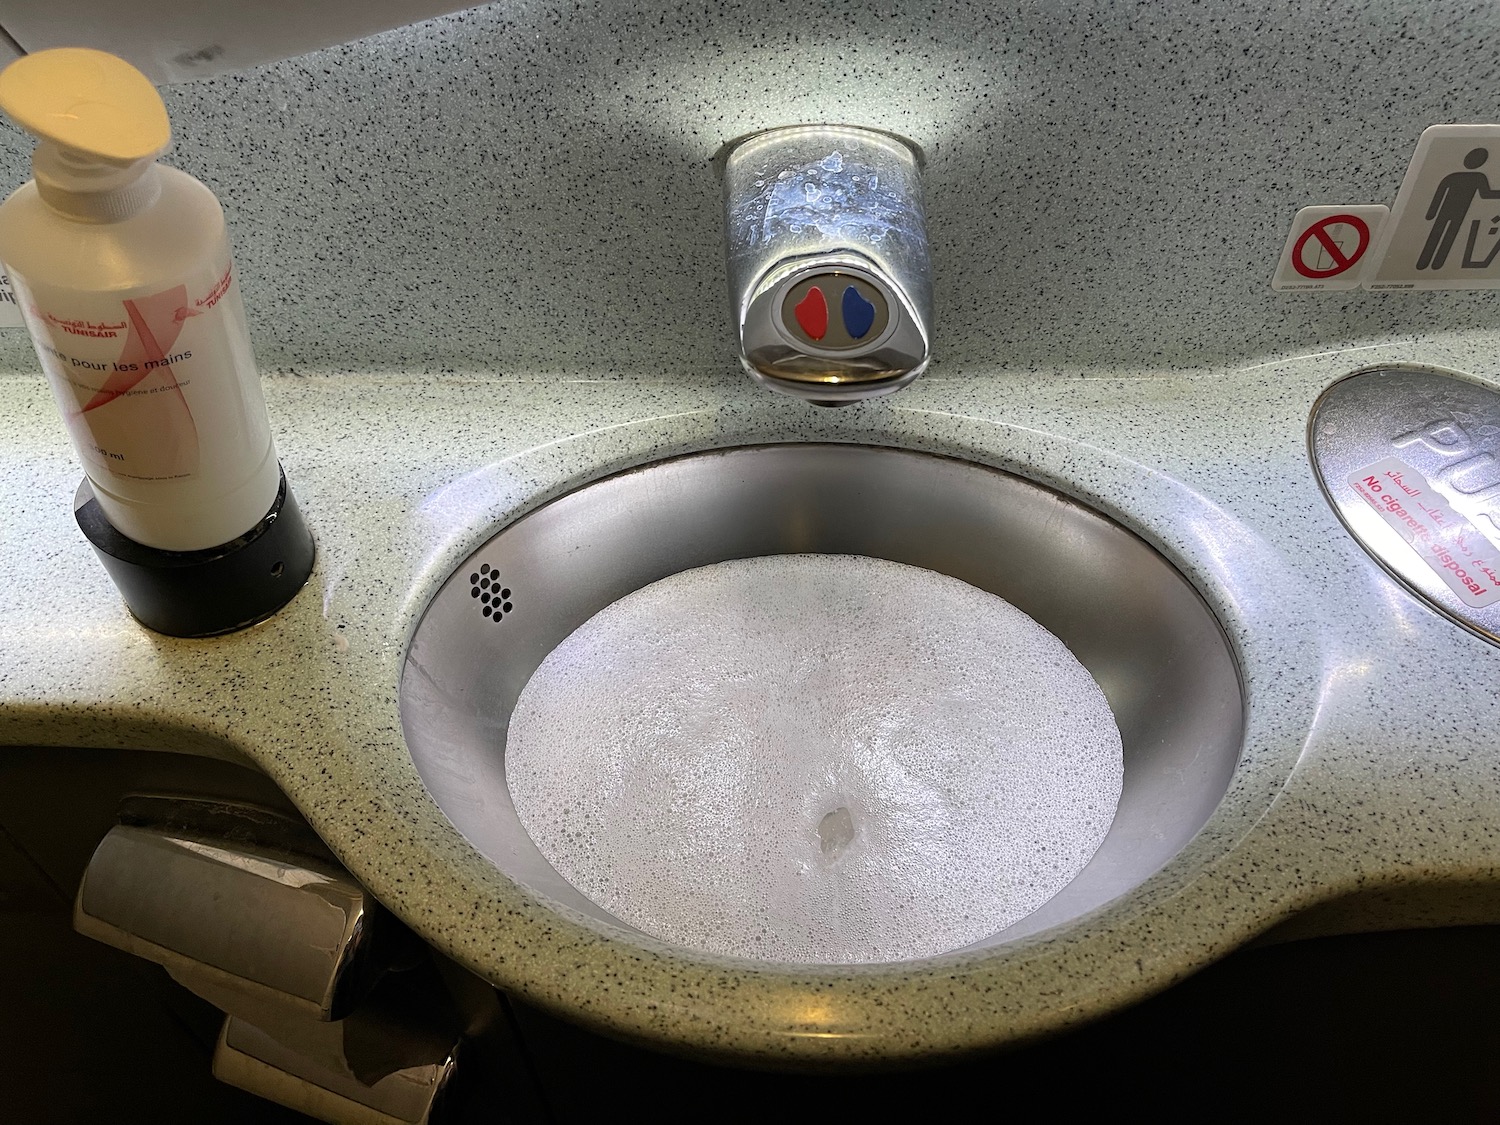 a sink with soap and soap dispenser